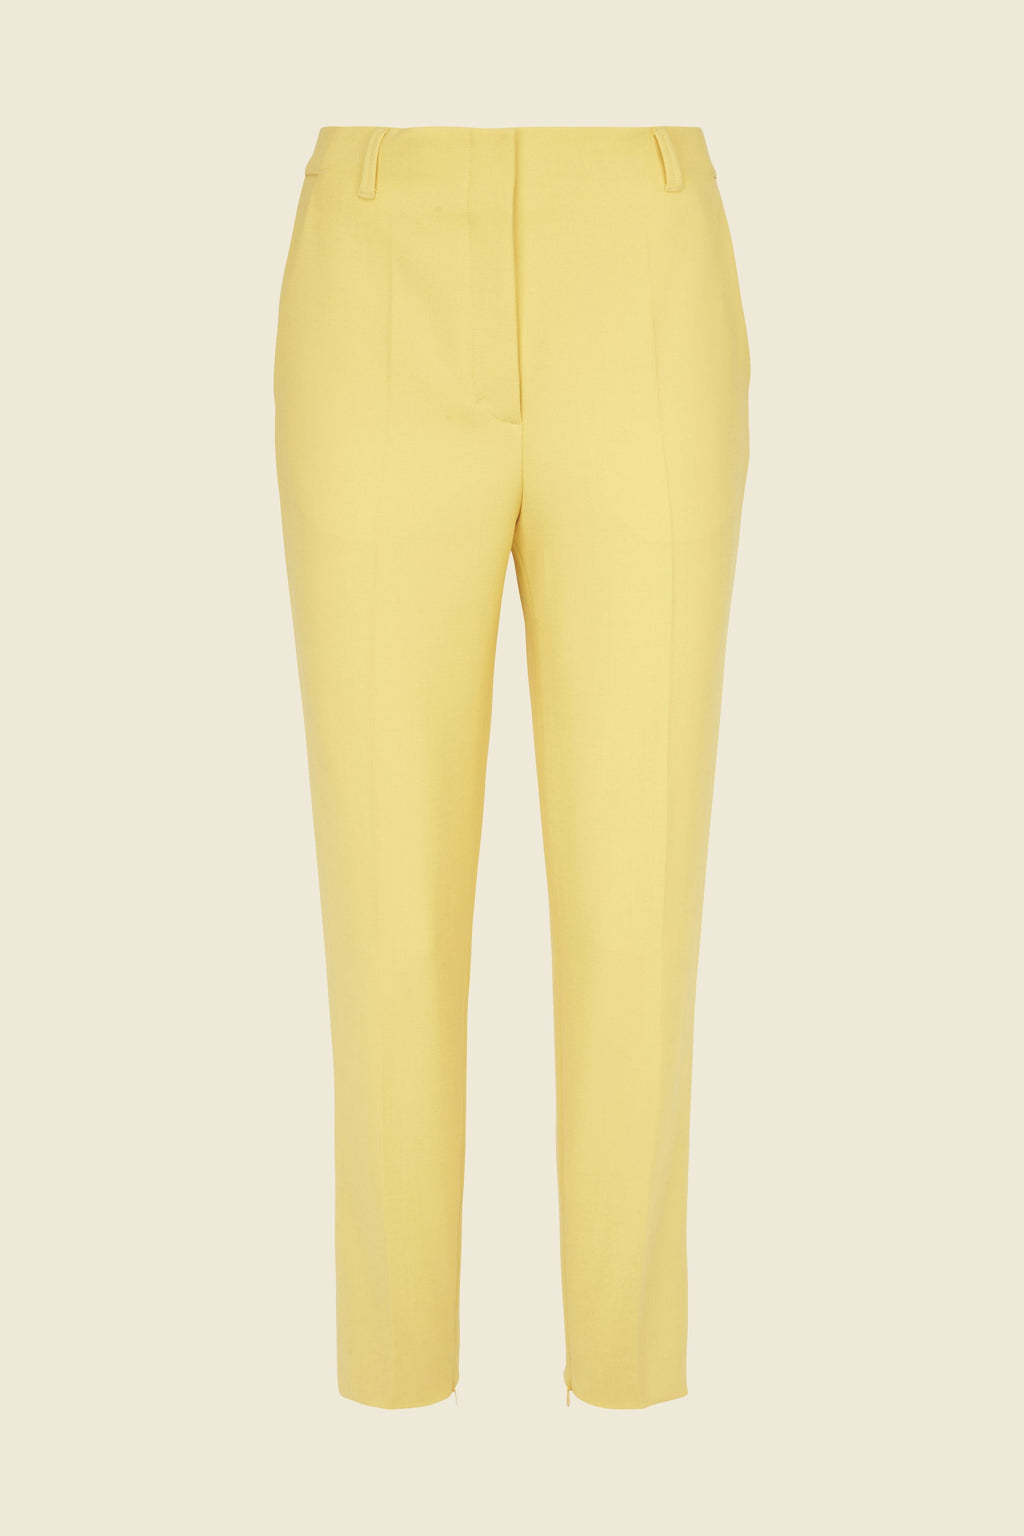 Dorothee Schumacher-OUTLET-SALE-REFRESHING AMBITION pants--ARCHIVIST